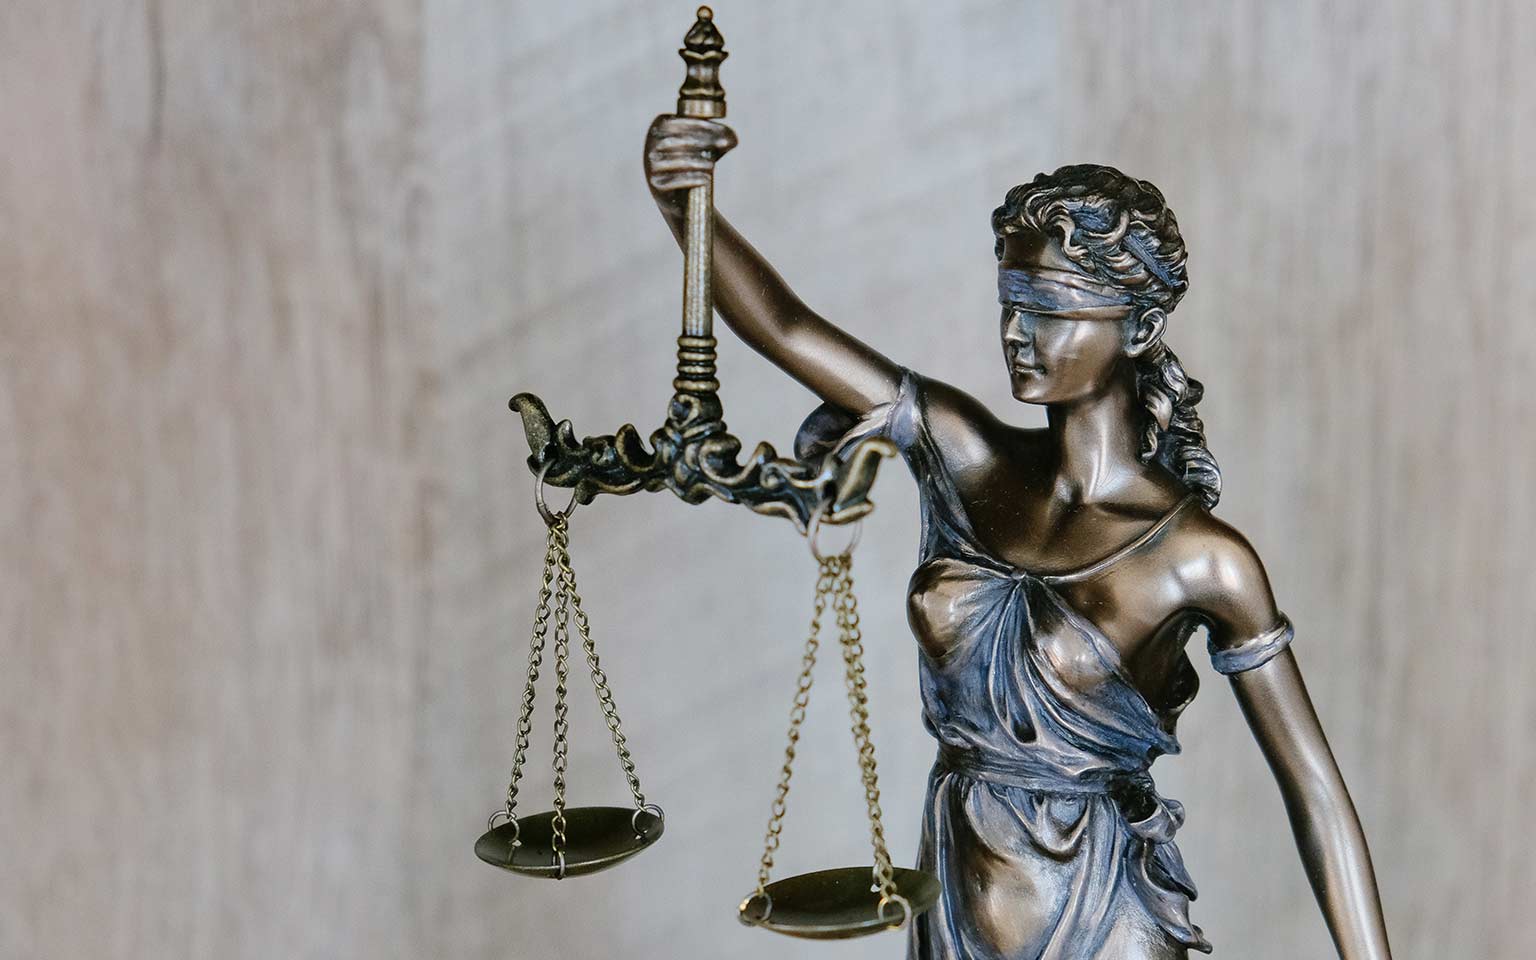 a small statue of lady justice holding the scales of justice